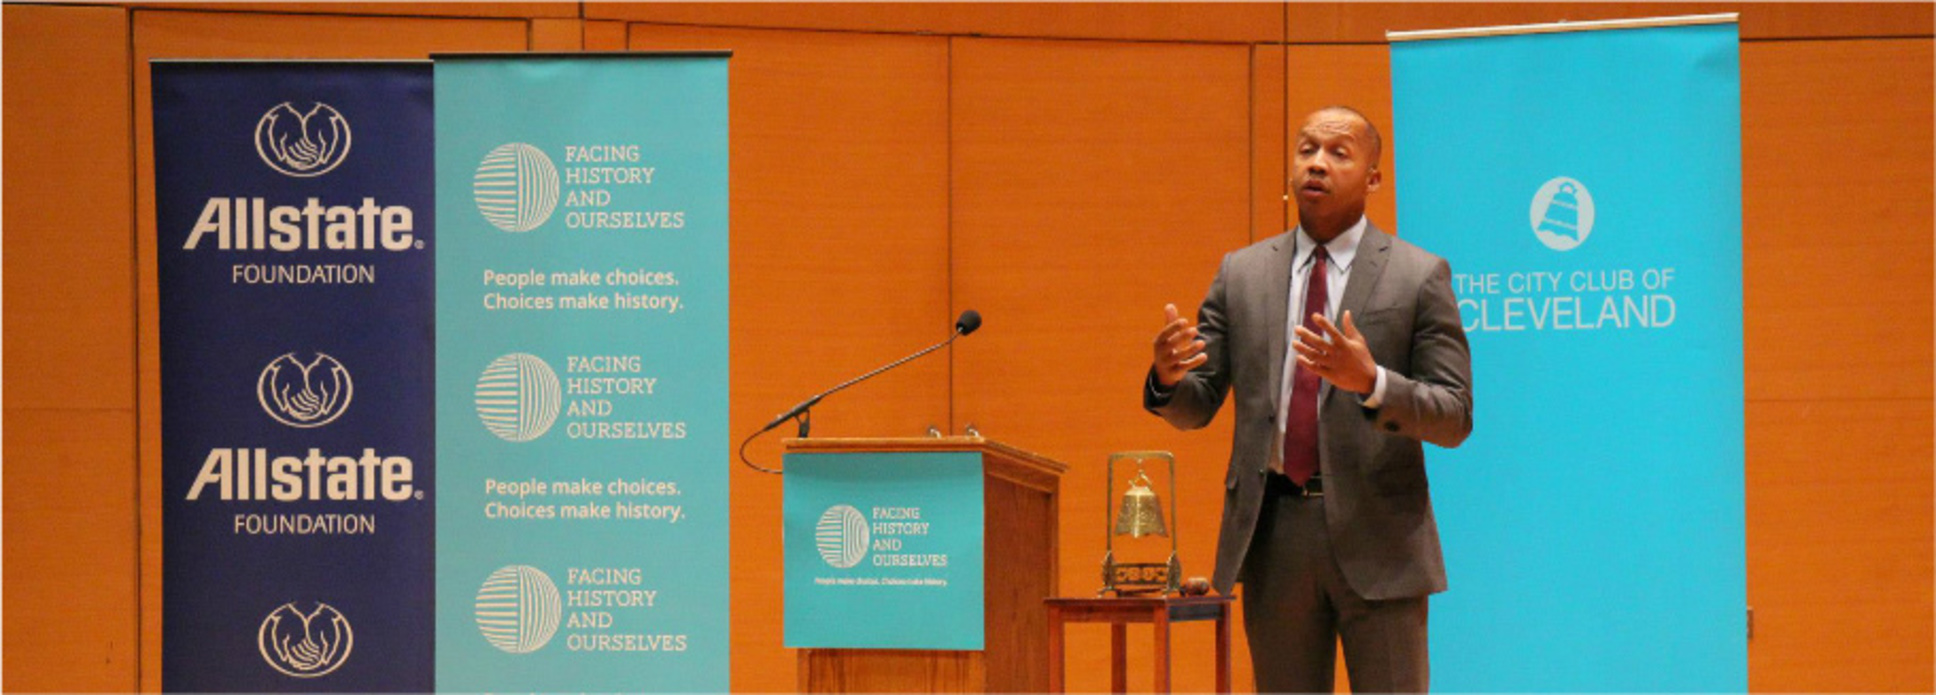 Activist and Author Bryan Stevenson Offers Four-Point Prescription For Tackling Injustice